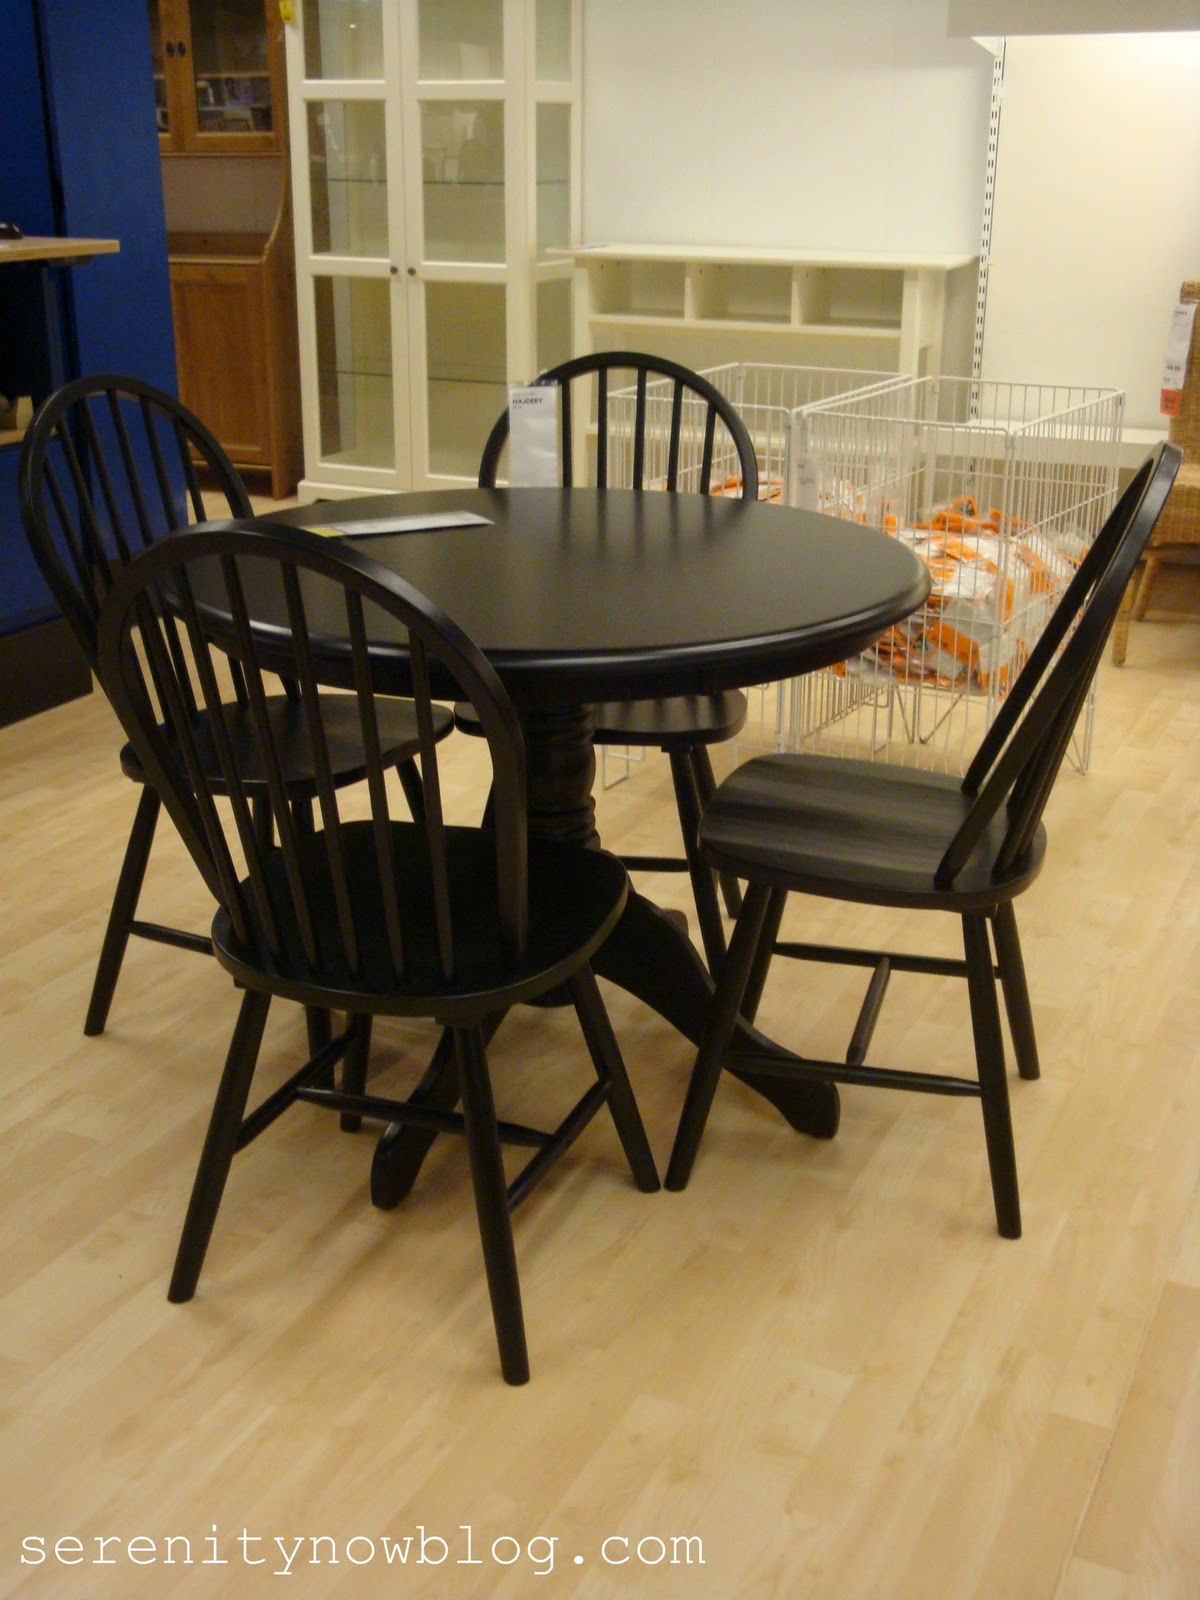 Small Black Kitchen Table inside Elegant and Interesting Small Black Kitchen Table for your Reference